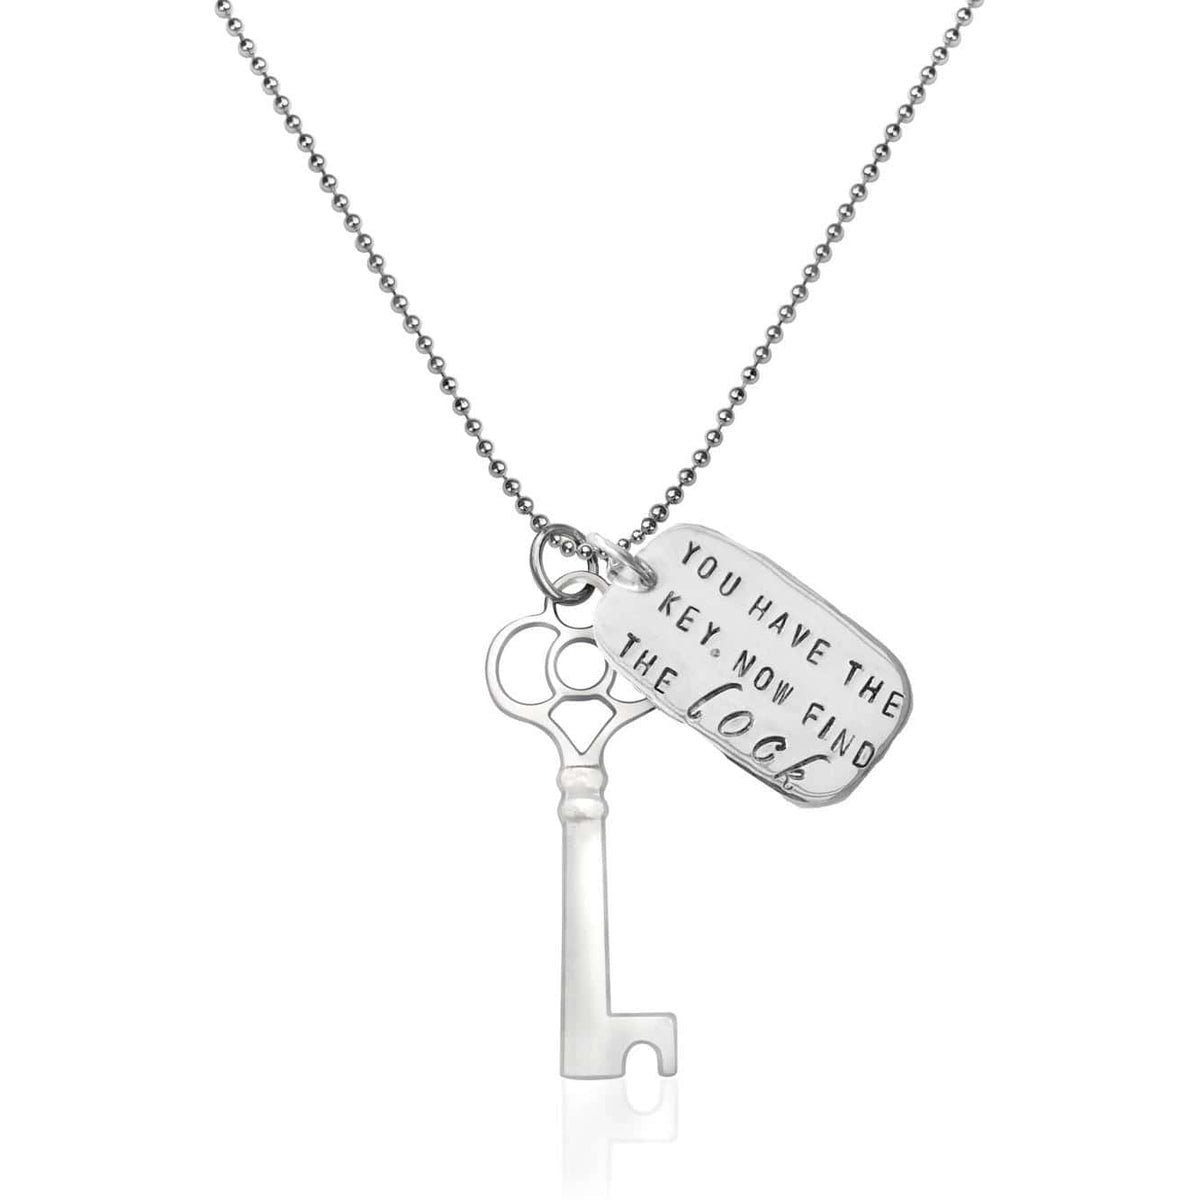 You Have the Key Now Find the Lock Sterling Silver Motivational Necklace with a Key